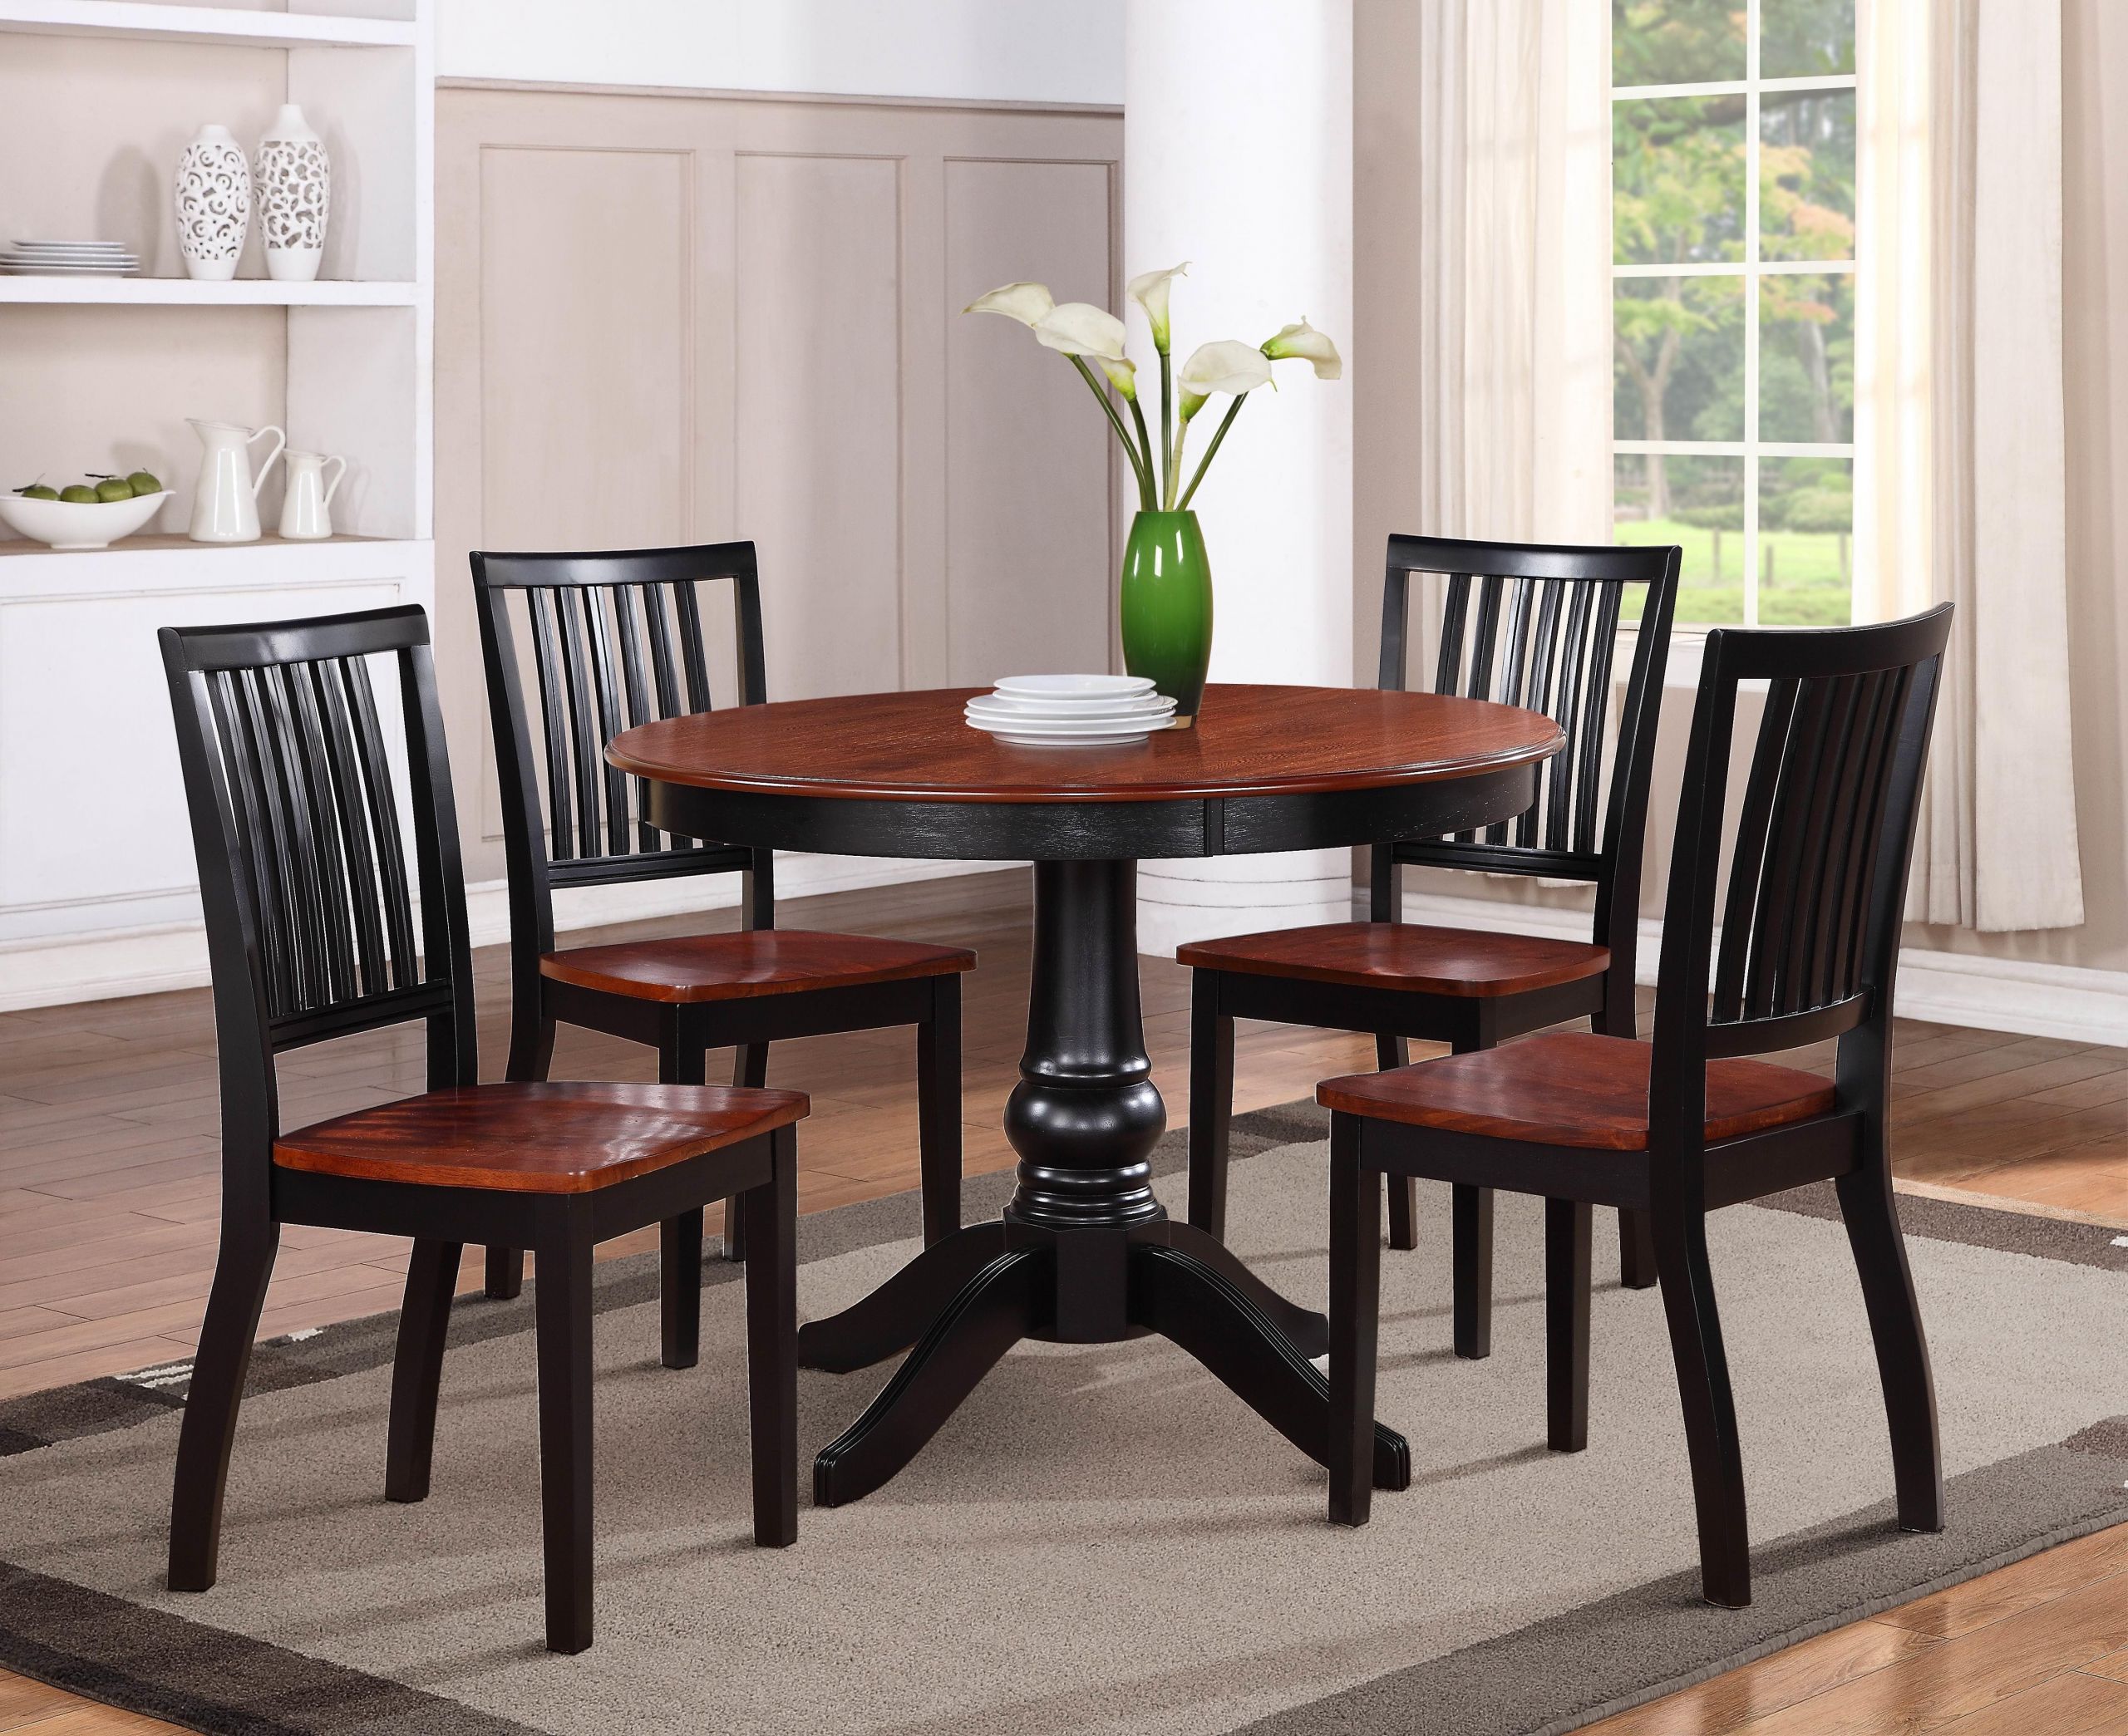 Dining Room And Kitchen Dinette Sets Stores